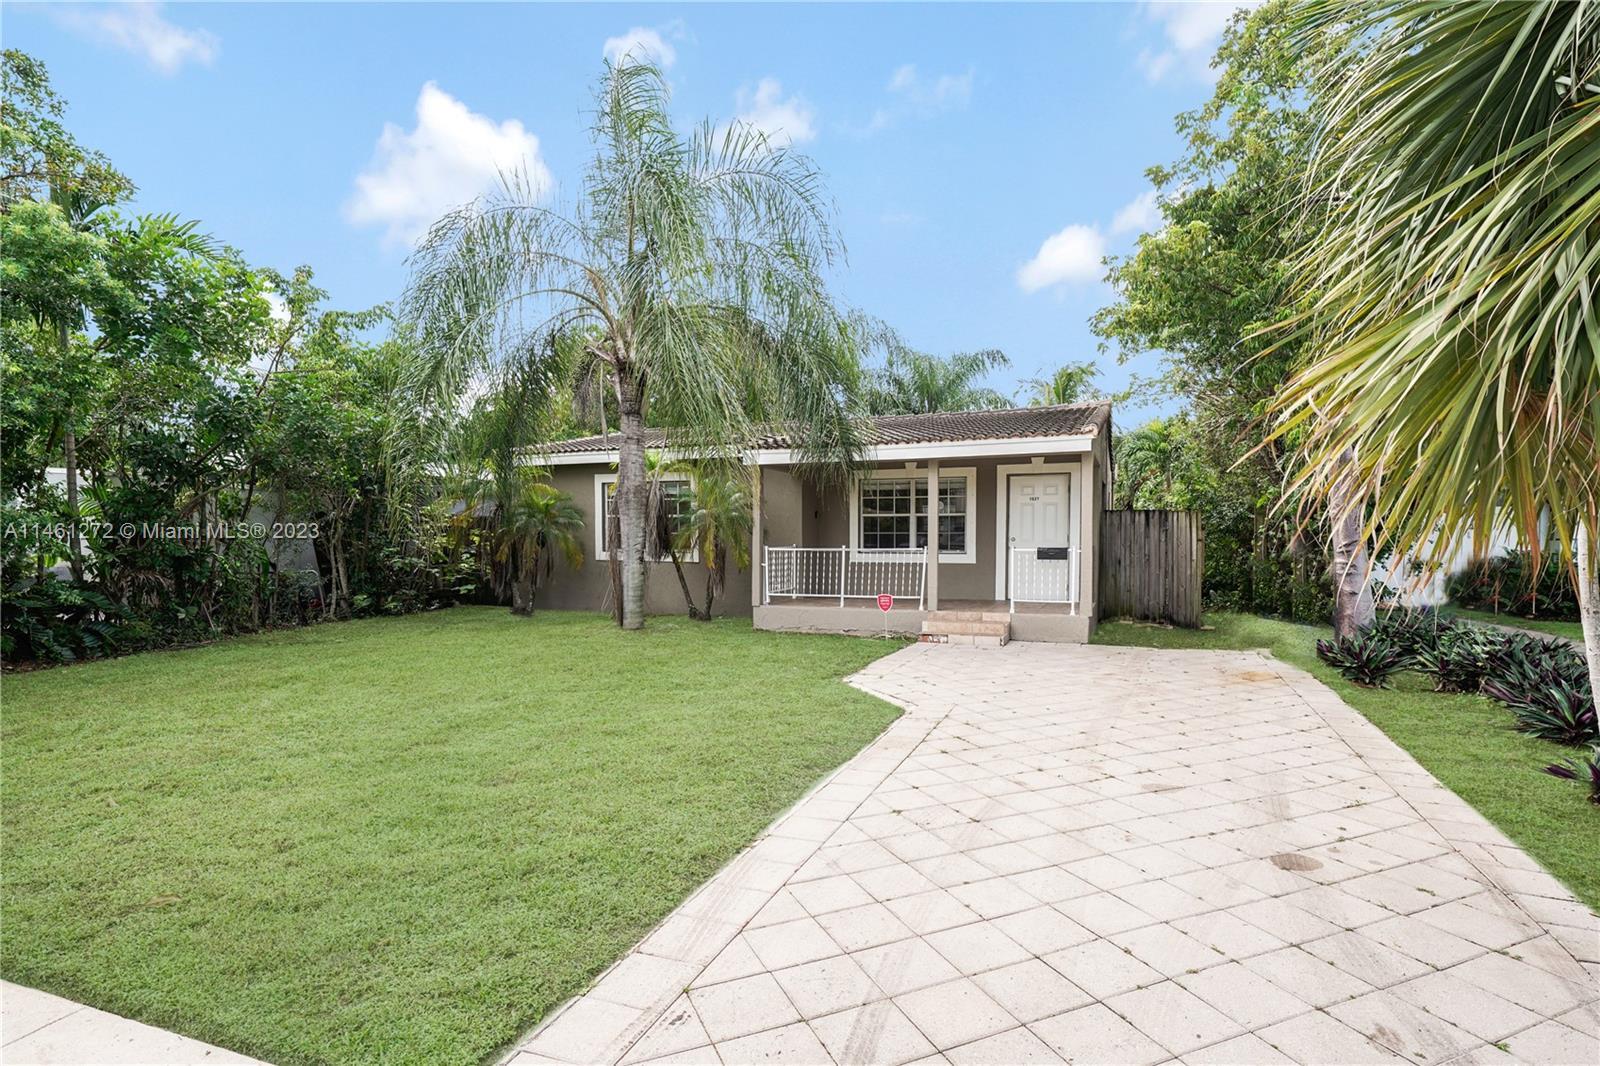 Located in the beautiful city of Fort Lauderdale very close to Wilton Manors, 4 miles to the beach a